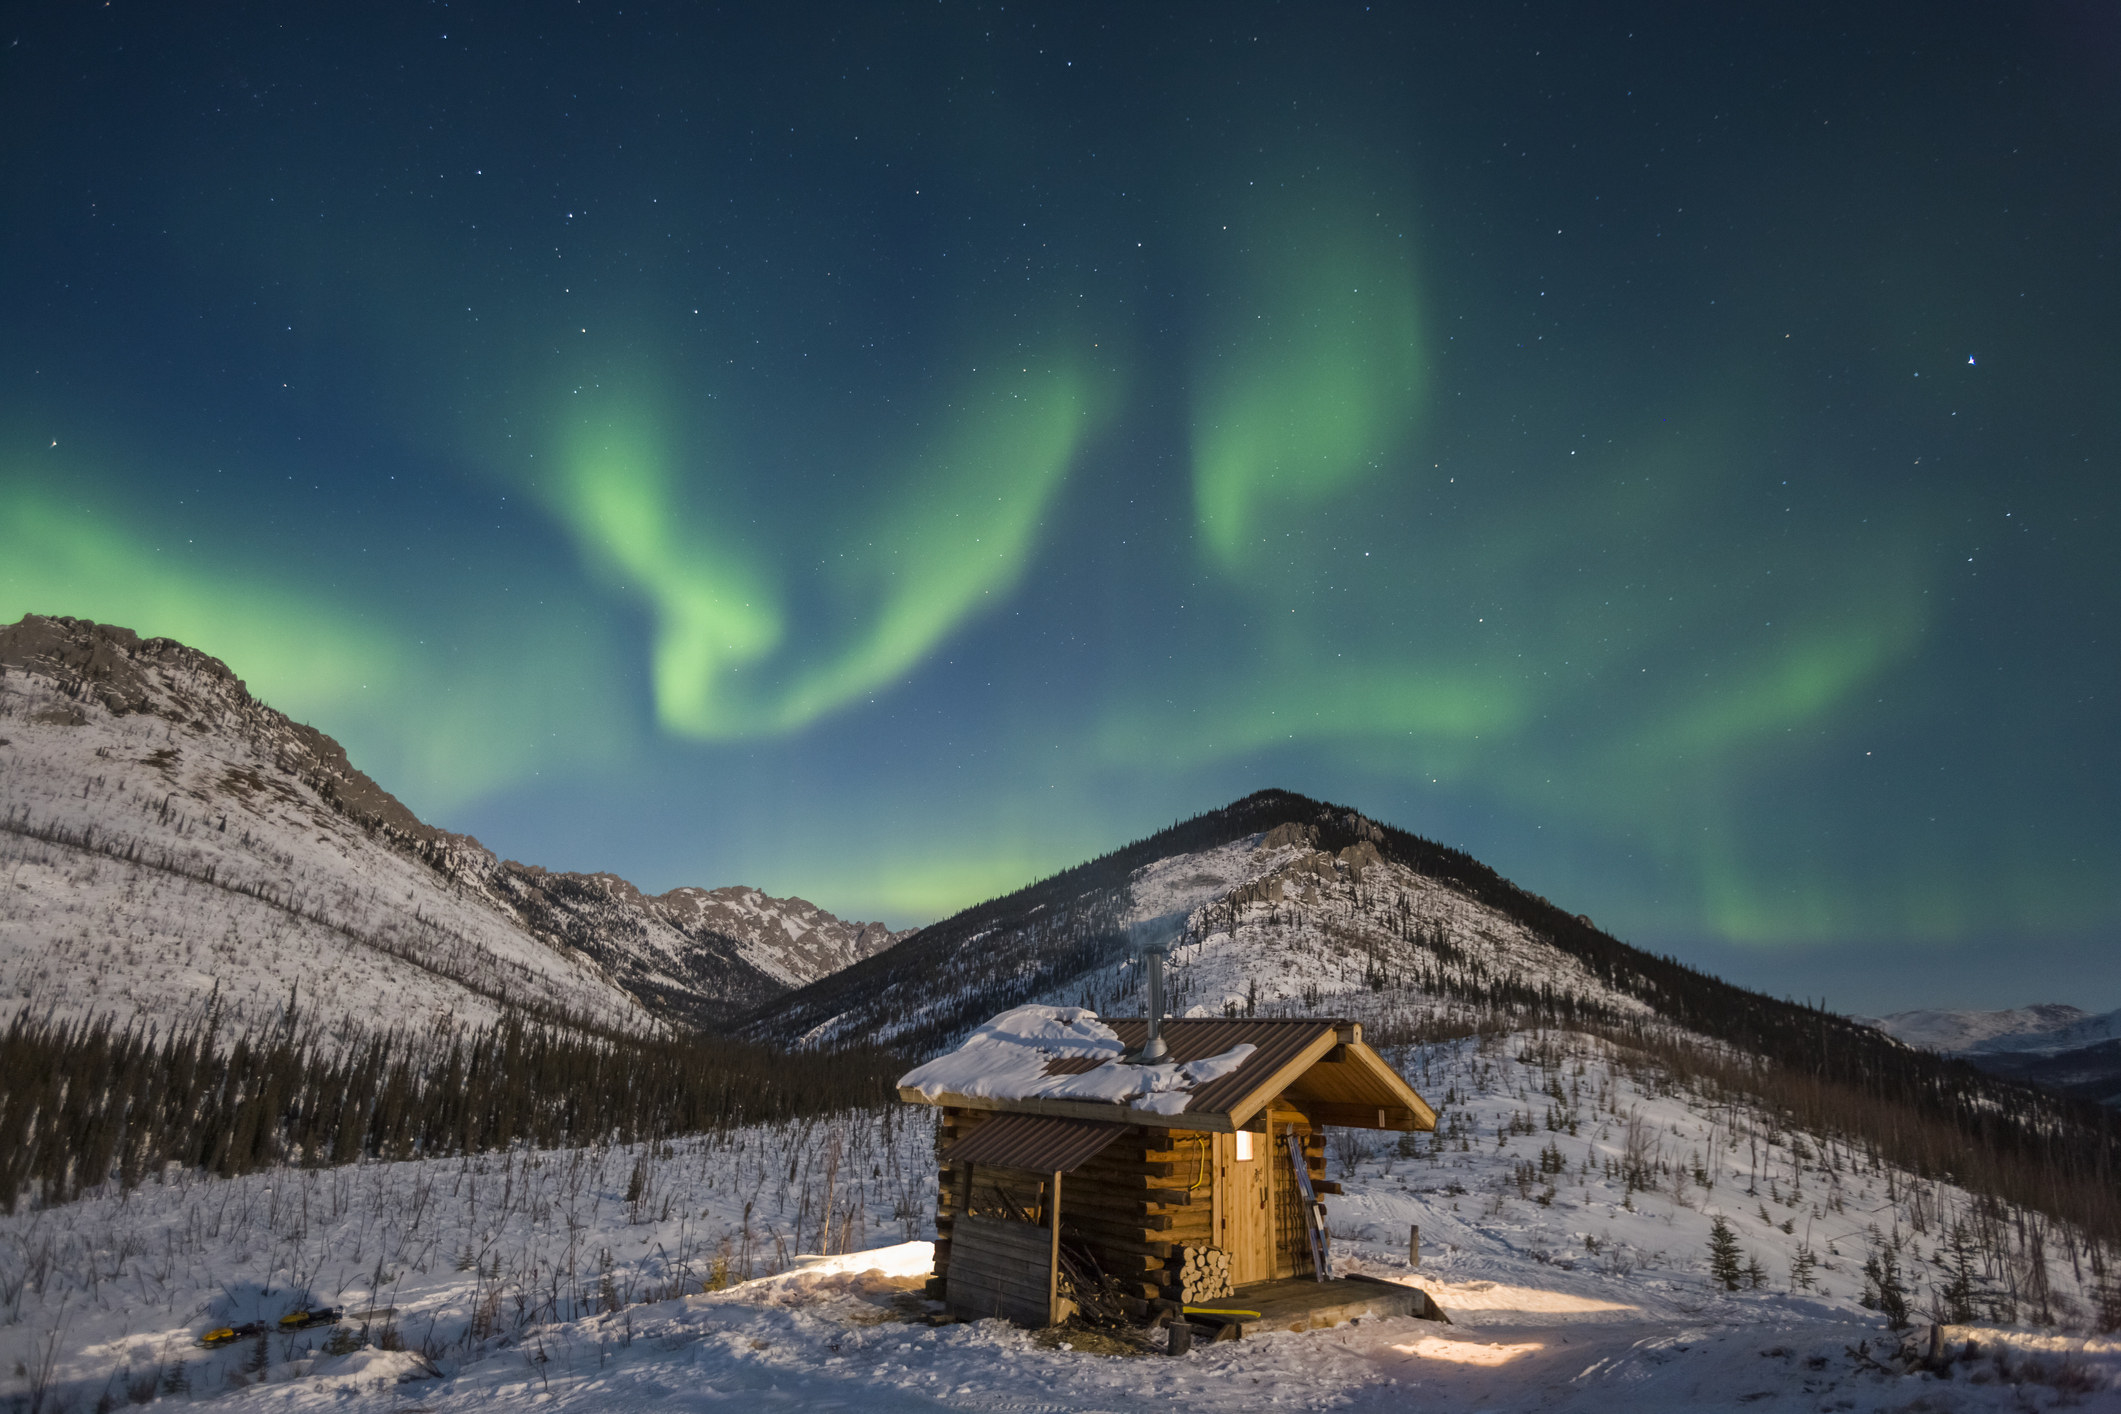 The Northern Lights over a cabin.